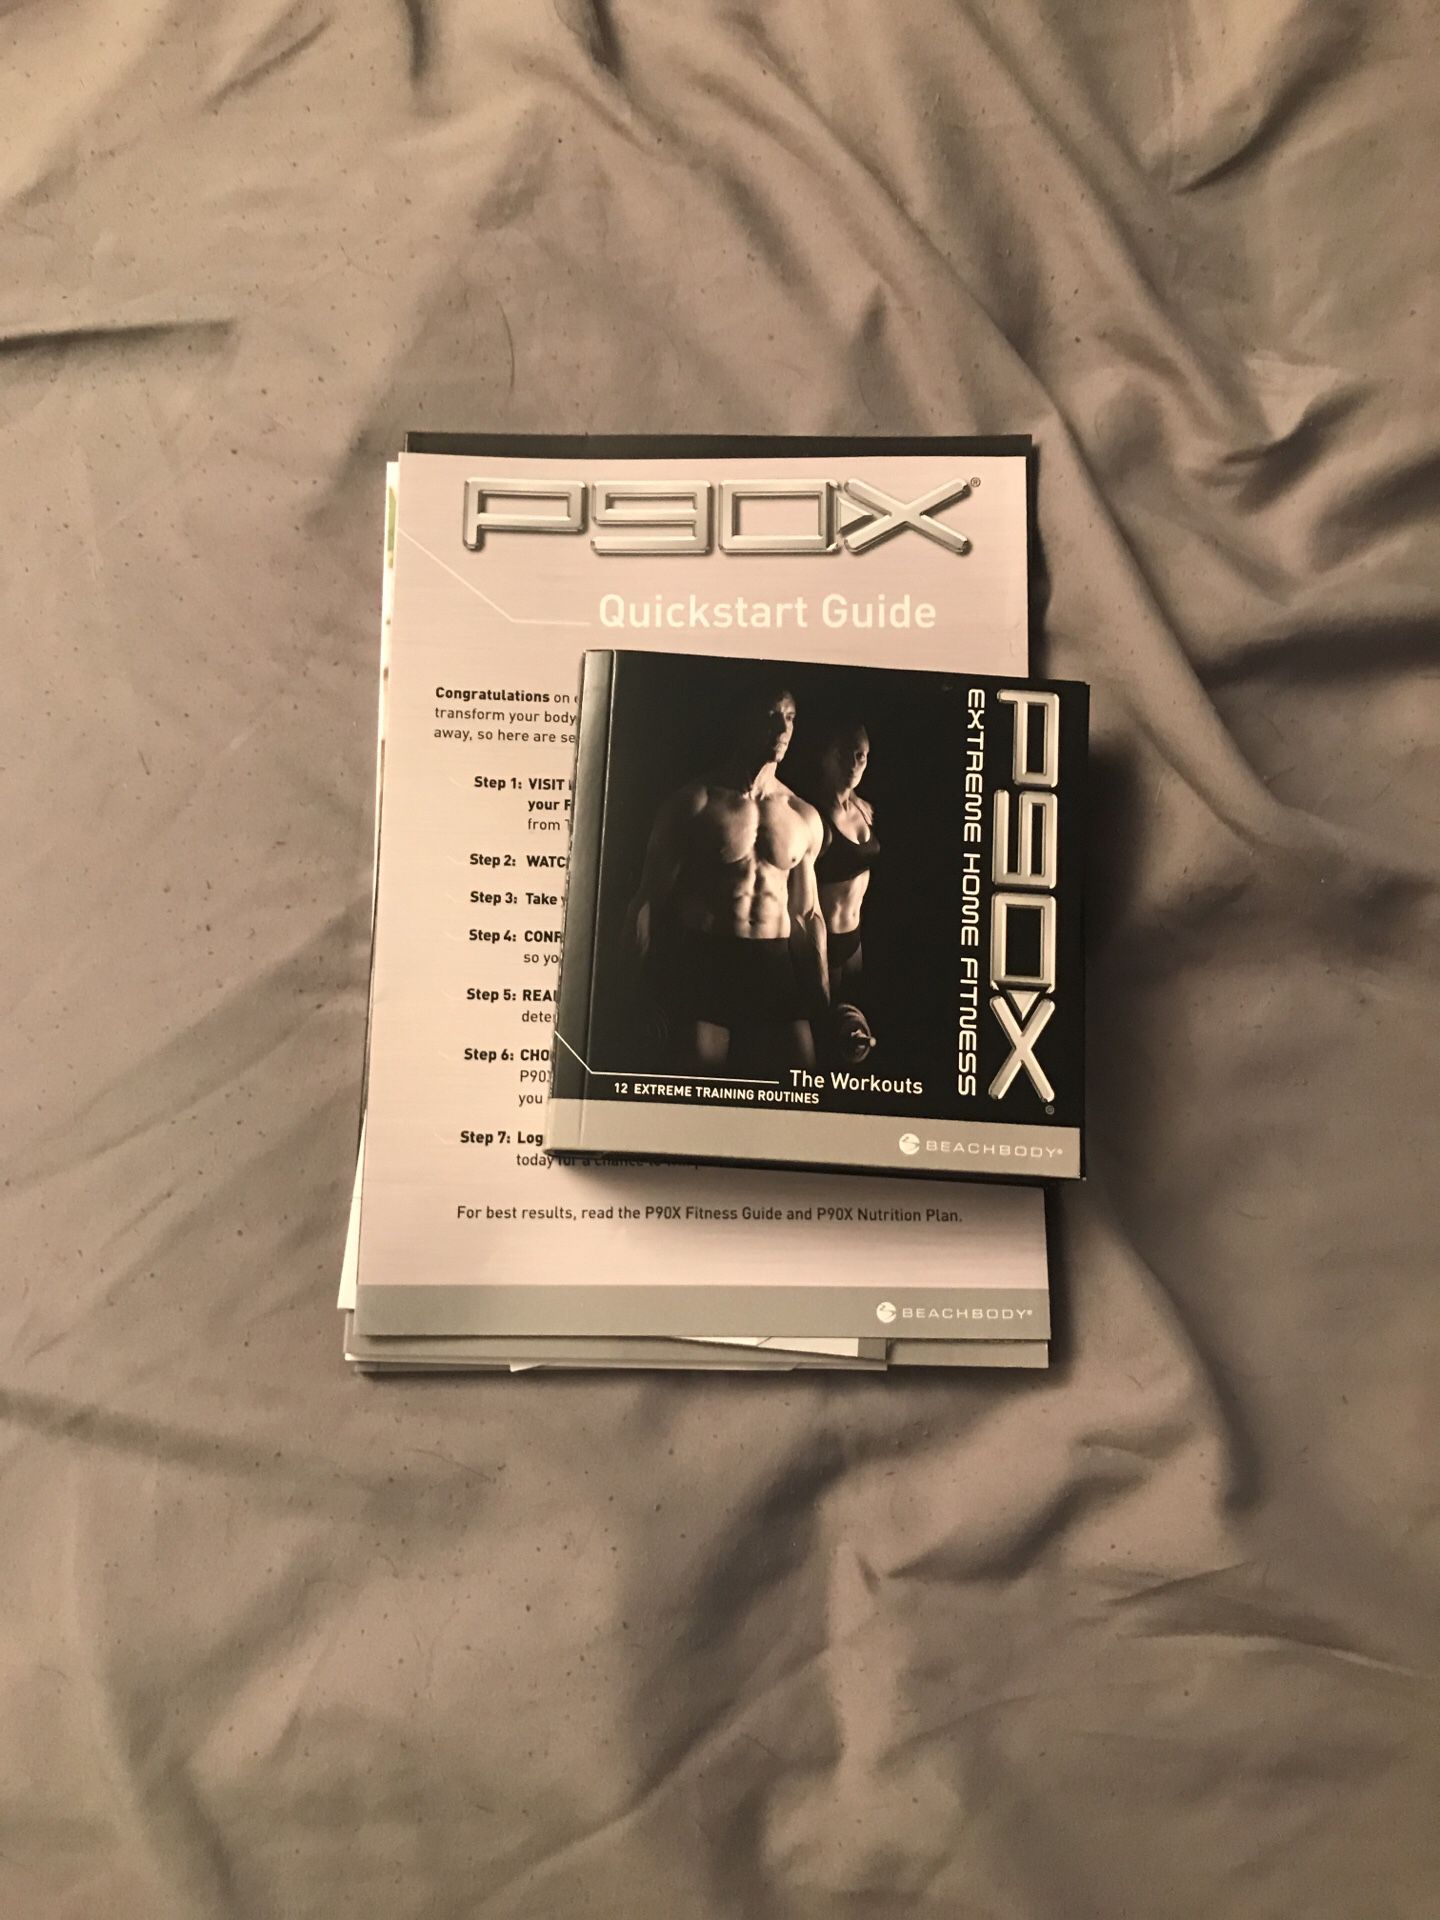 P90X DVDs, fitness guide, and nutritional planner